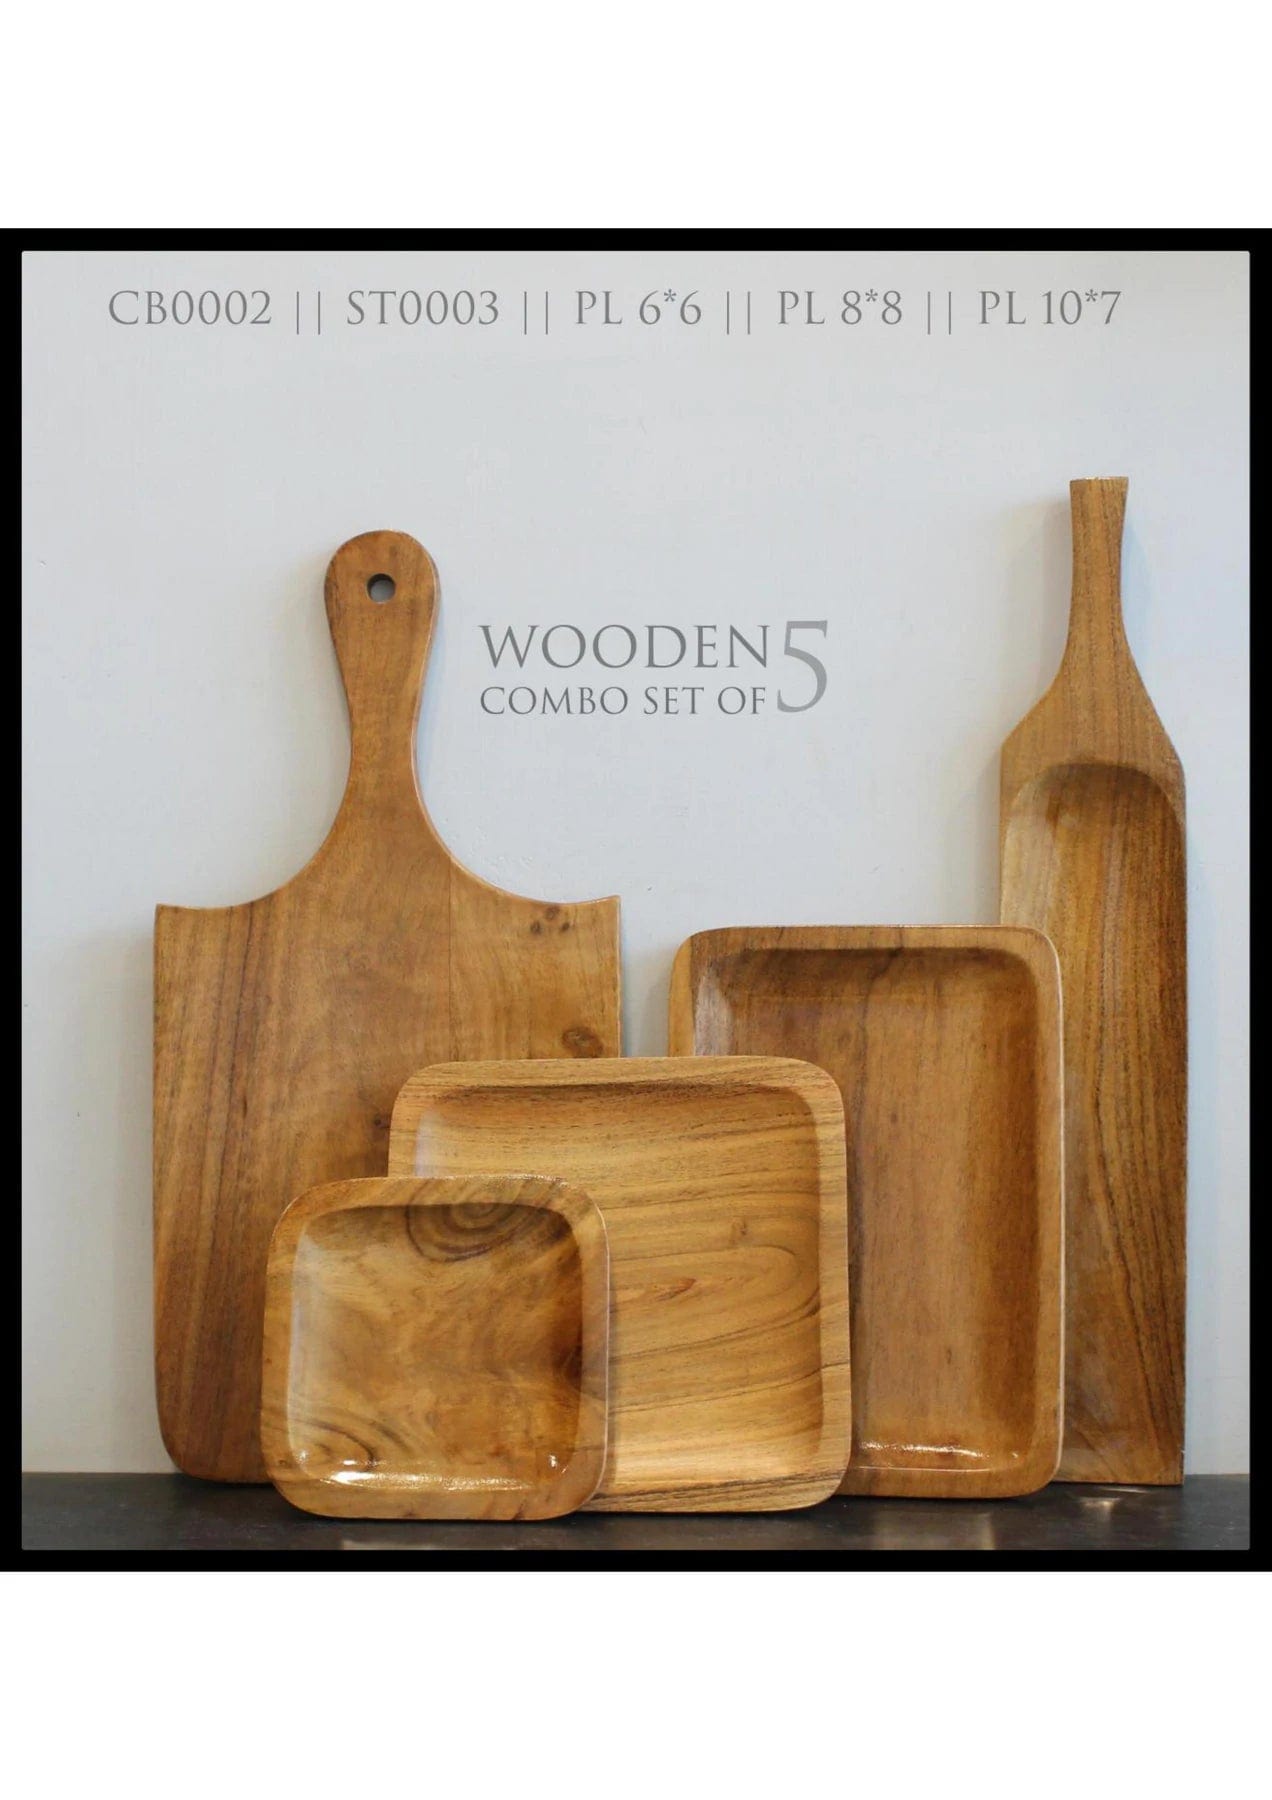 WOODEN PLATTERS COMBO SET WITH CHOPPING BOARDS II ACACIA WOOD